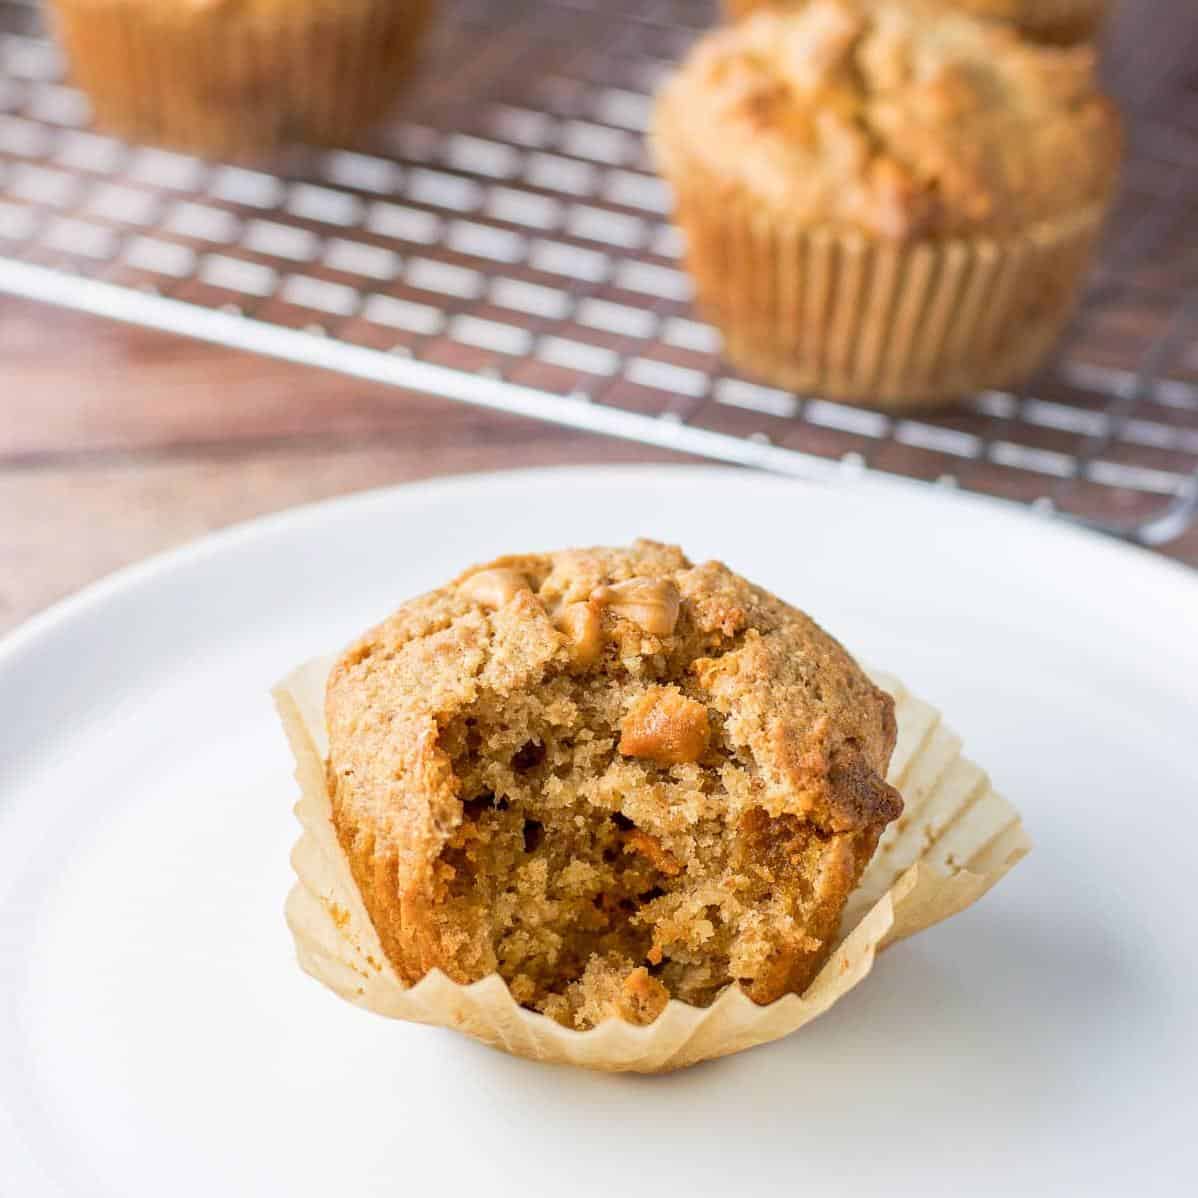  These muffins will melt in your mouth with their buttery goodness.